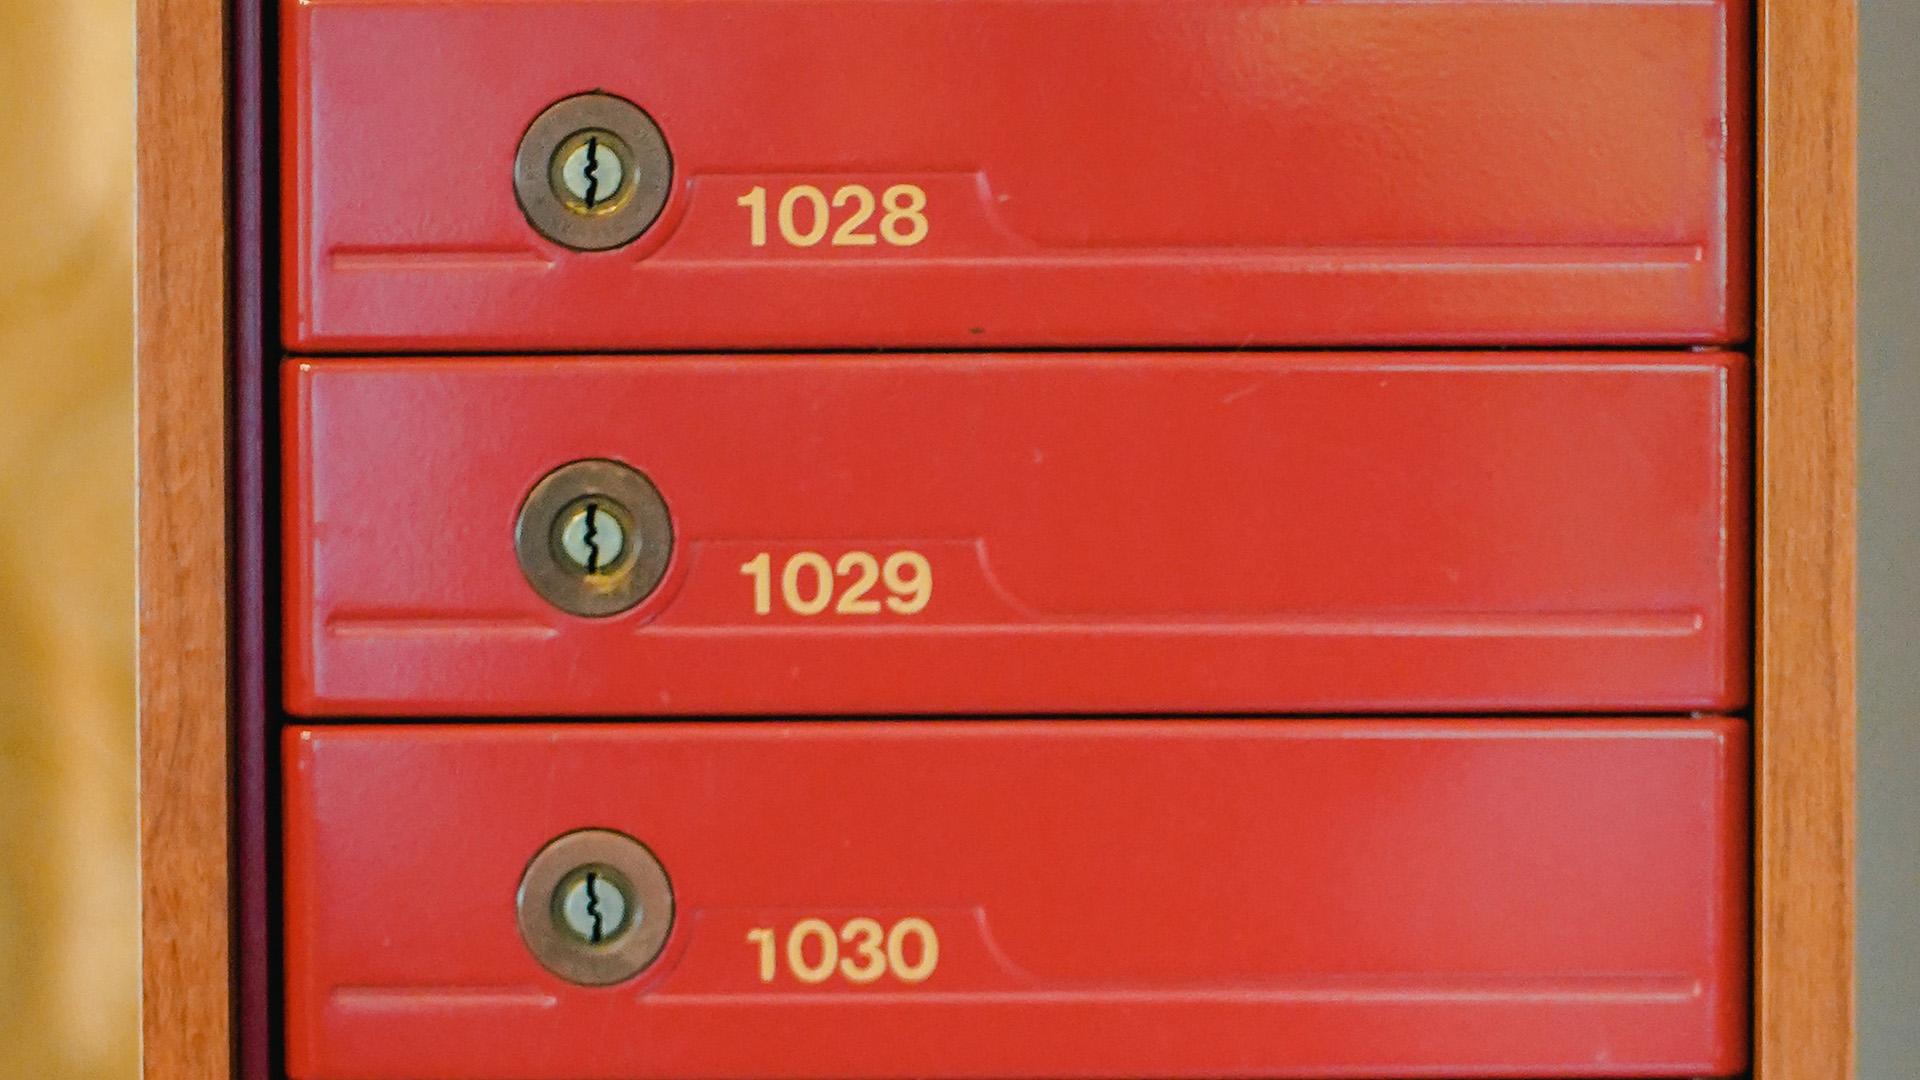 Decorative: image of postboxes to illustrate moving files